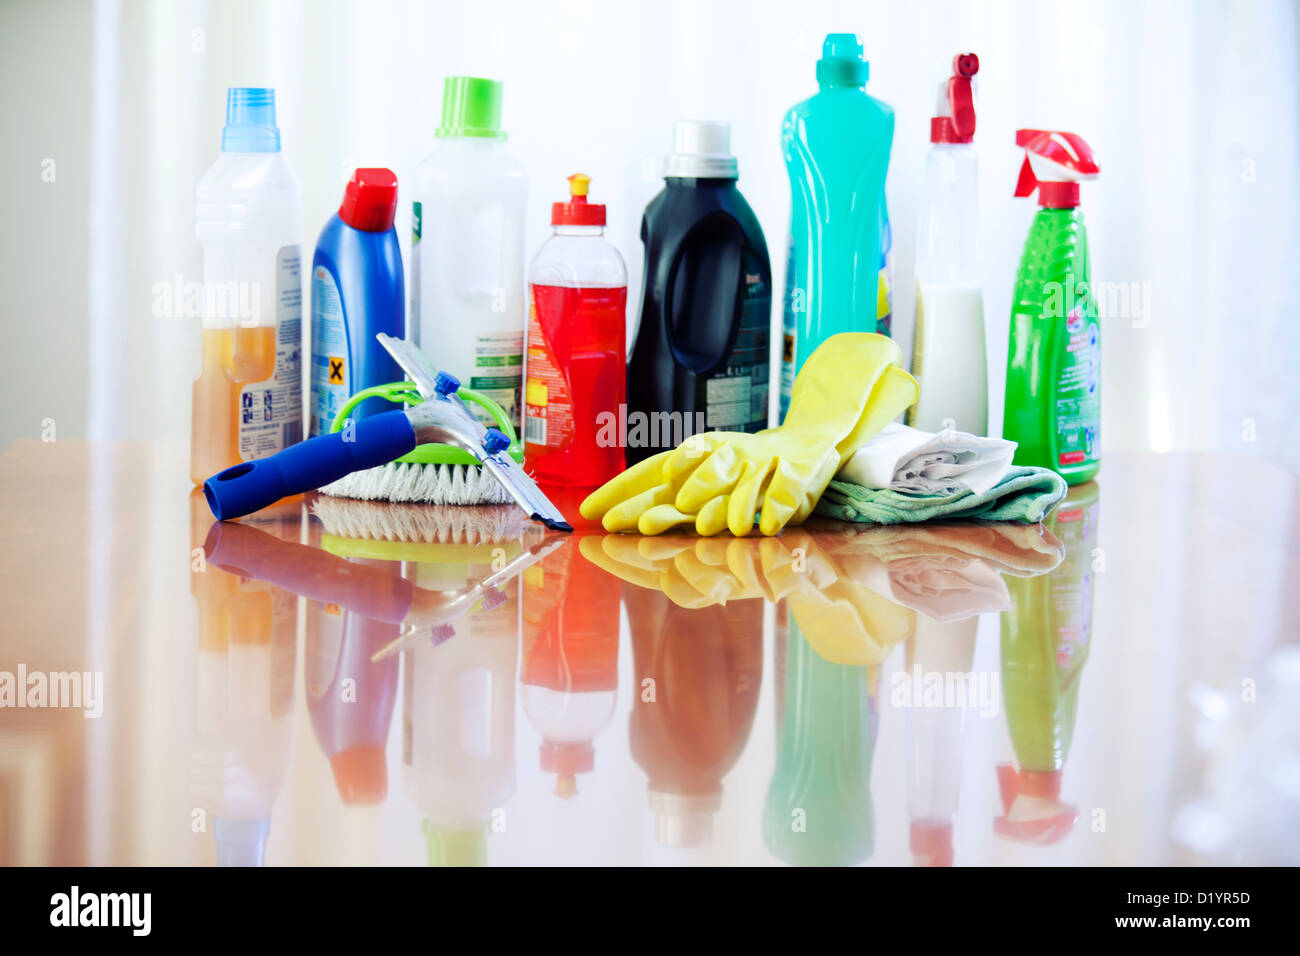 CLEANING SUPPLIES BOTTLES CHEMICAL DETERGENT Stock Photo